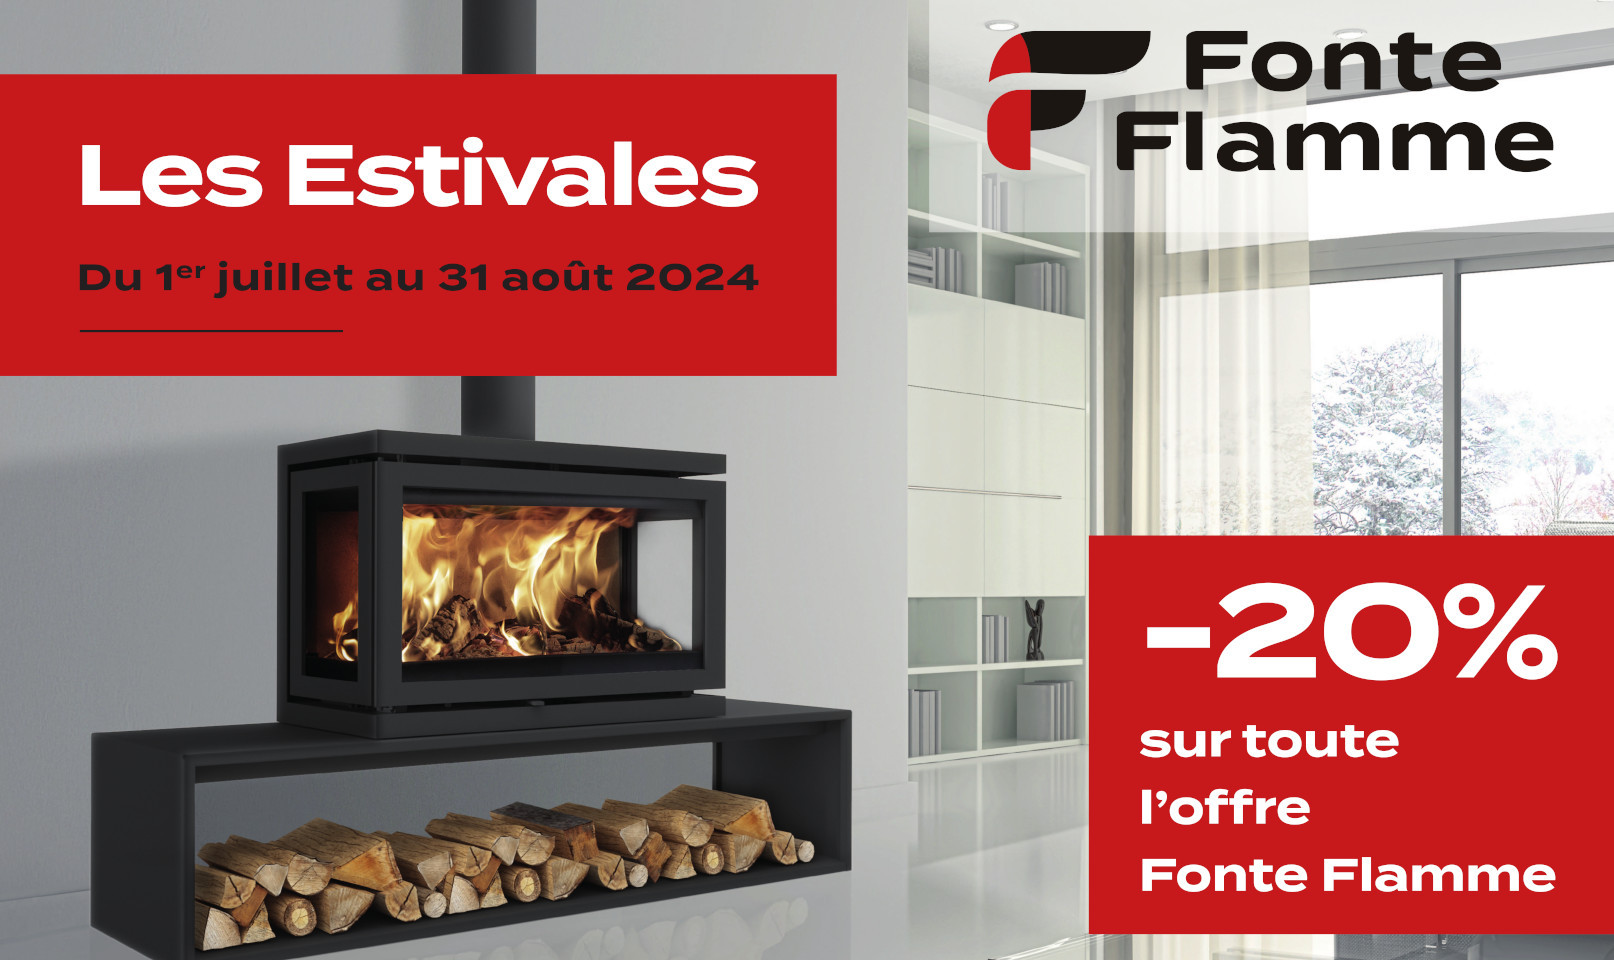 FF_LesEstivales2024_Affiche70x100_ital